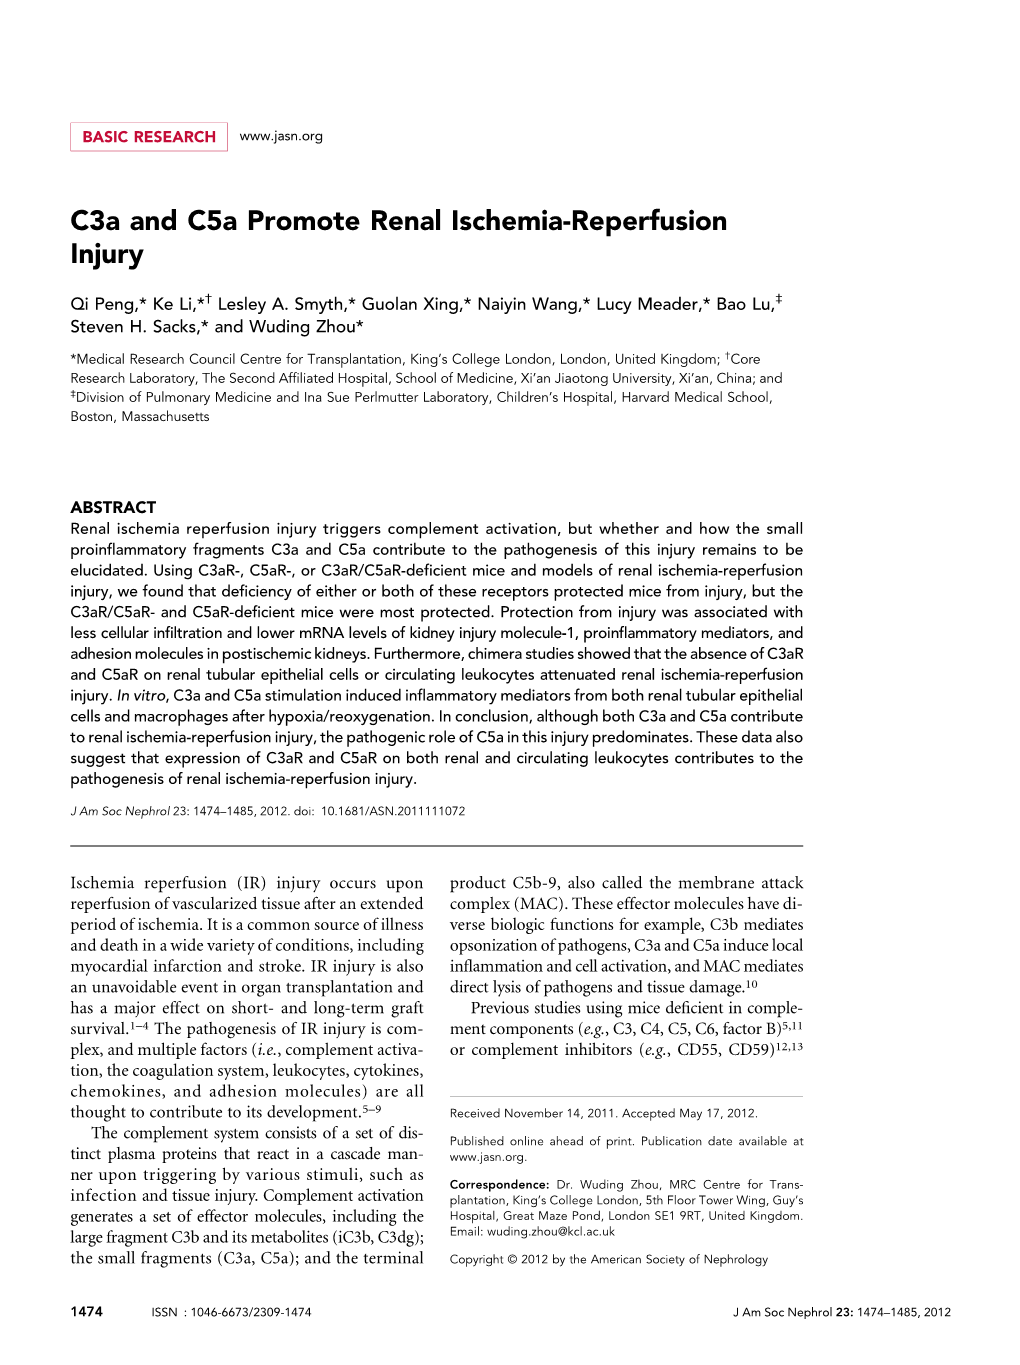 C3a and C5a Promote Renal Ischemia-Reperfusion Injury